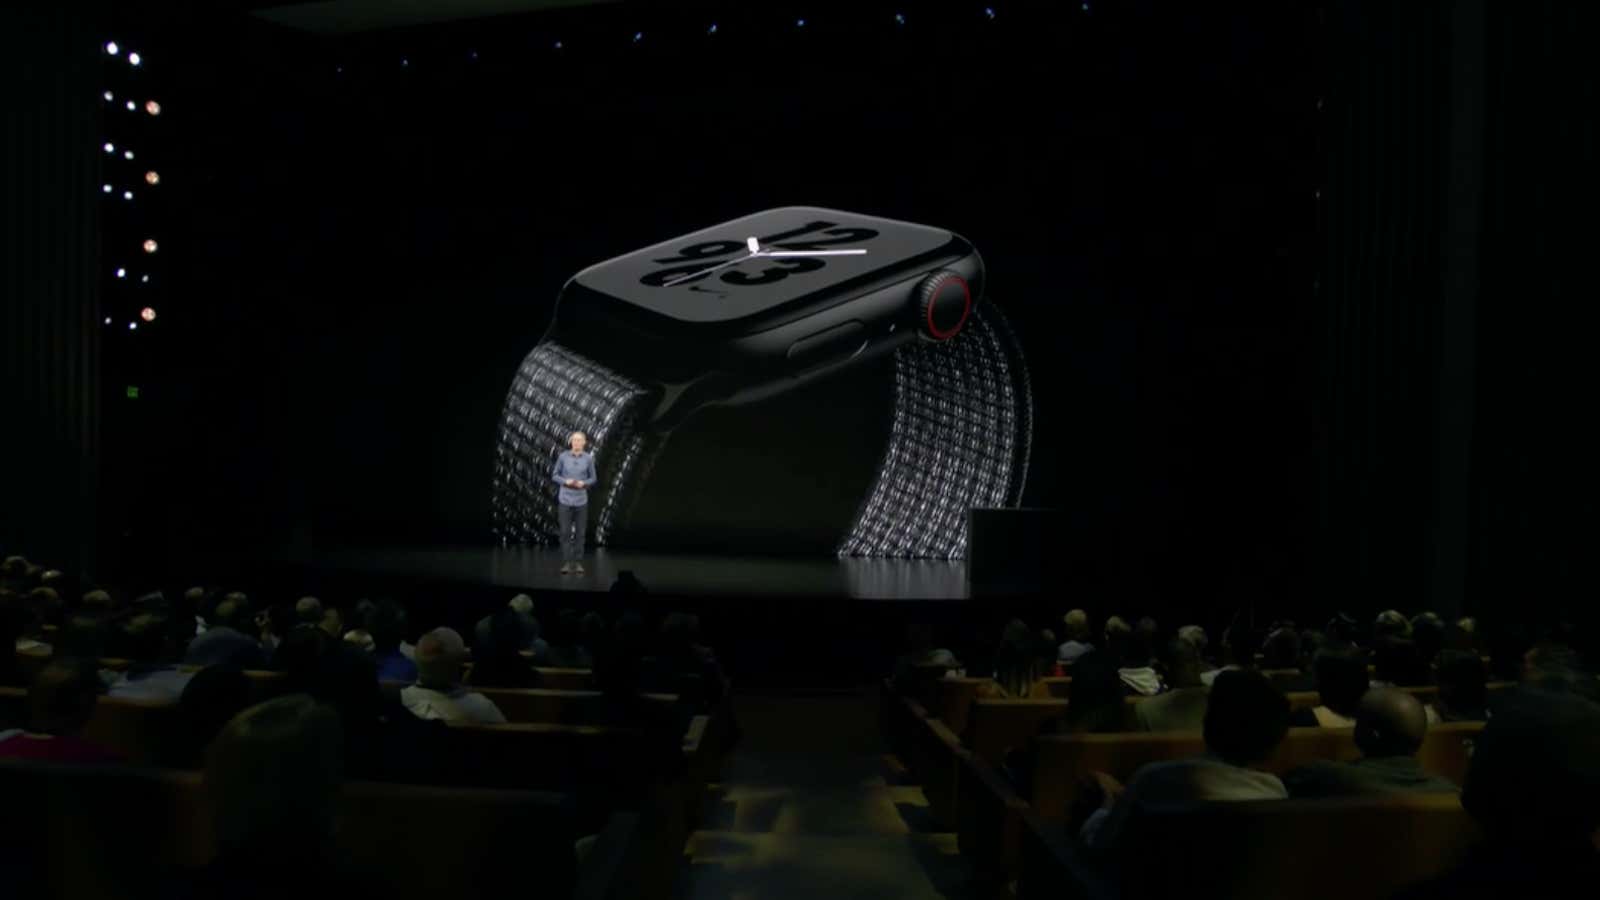 The Apple Watch Series 4 is an ECG.